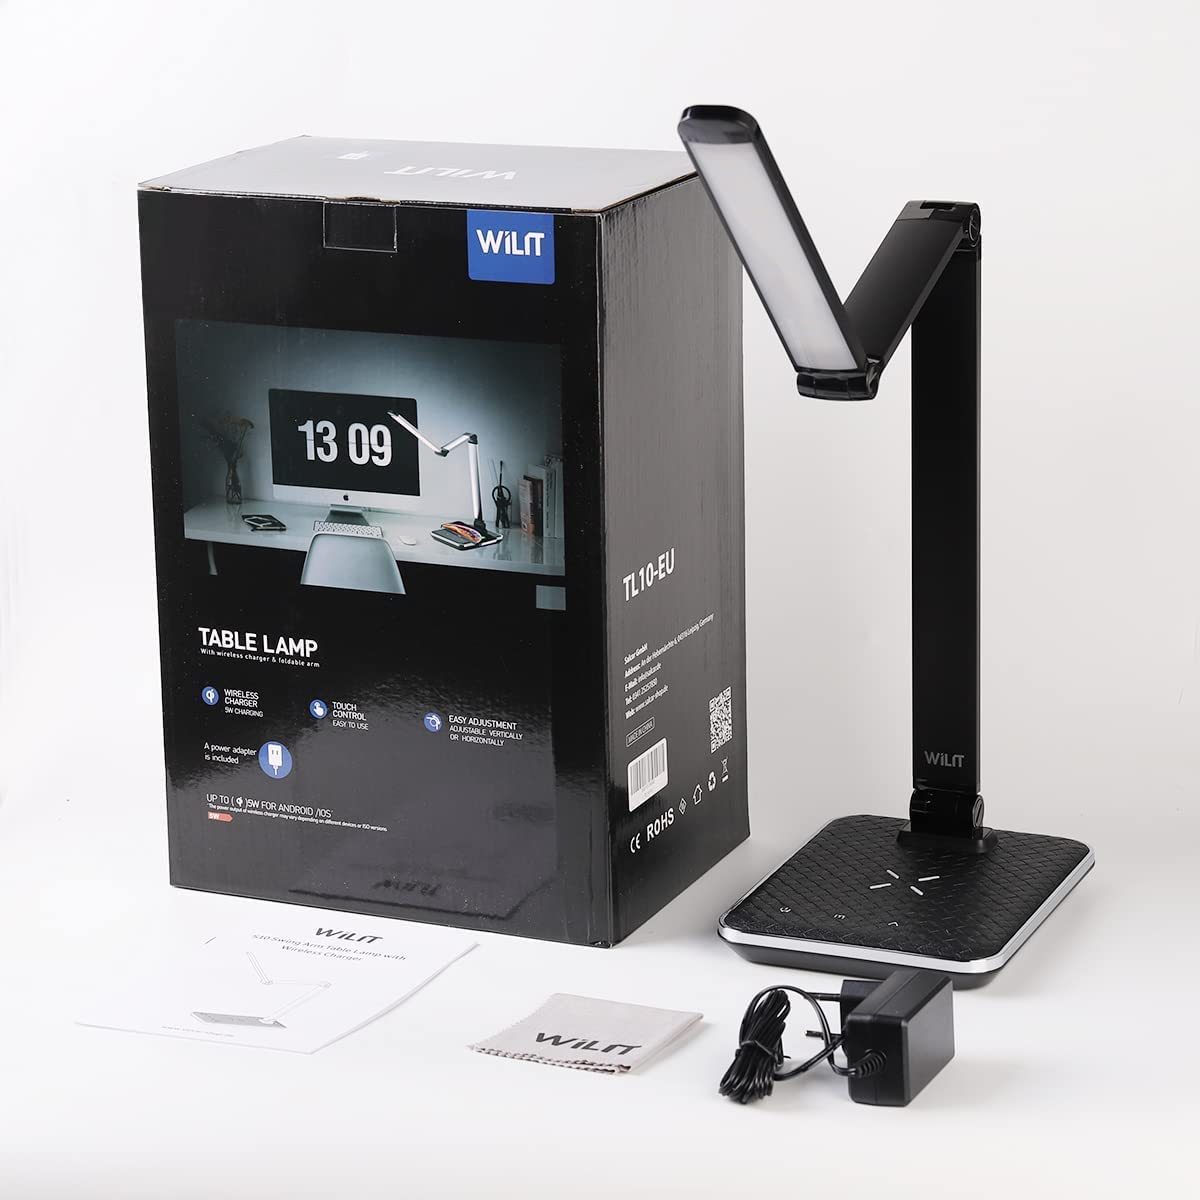 WILIT LED Table Lamp with Wireless Charger Q3Q - Table Lamp